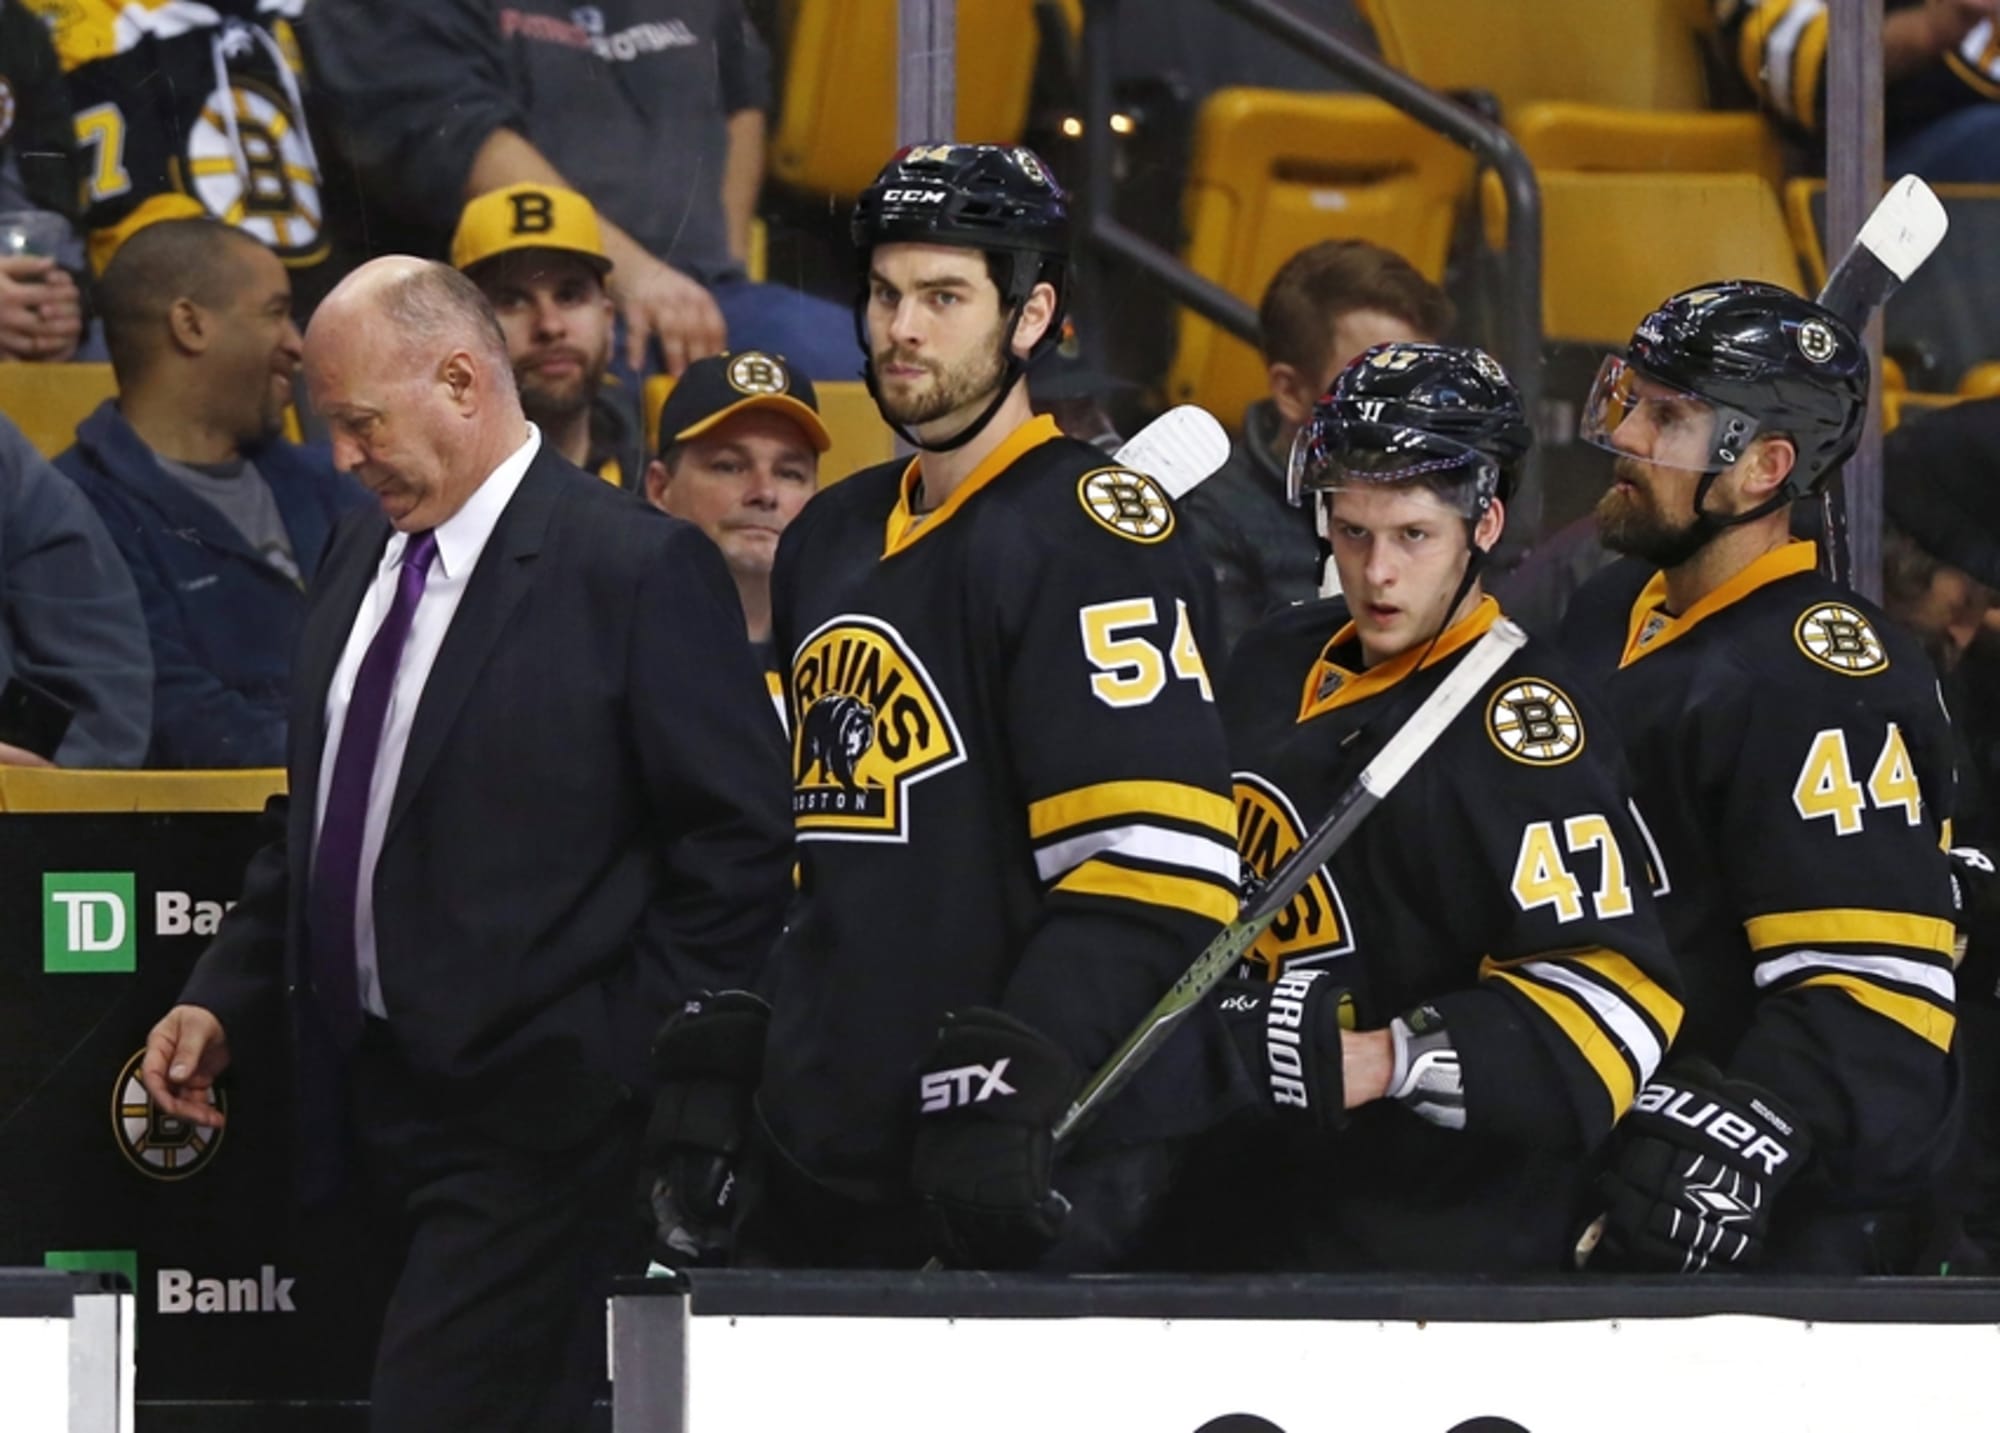 Bruins face the Blackhawks in a non-conference matchup